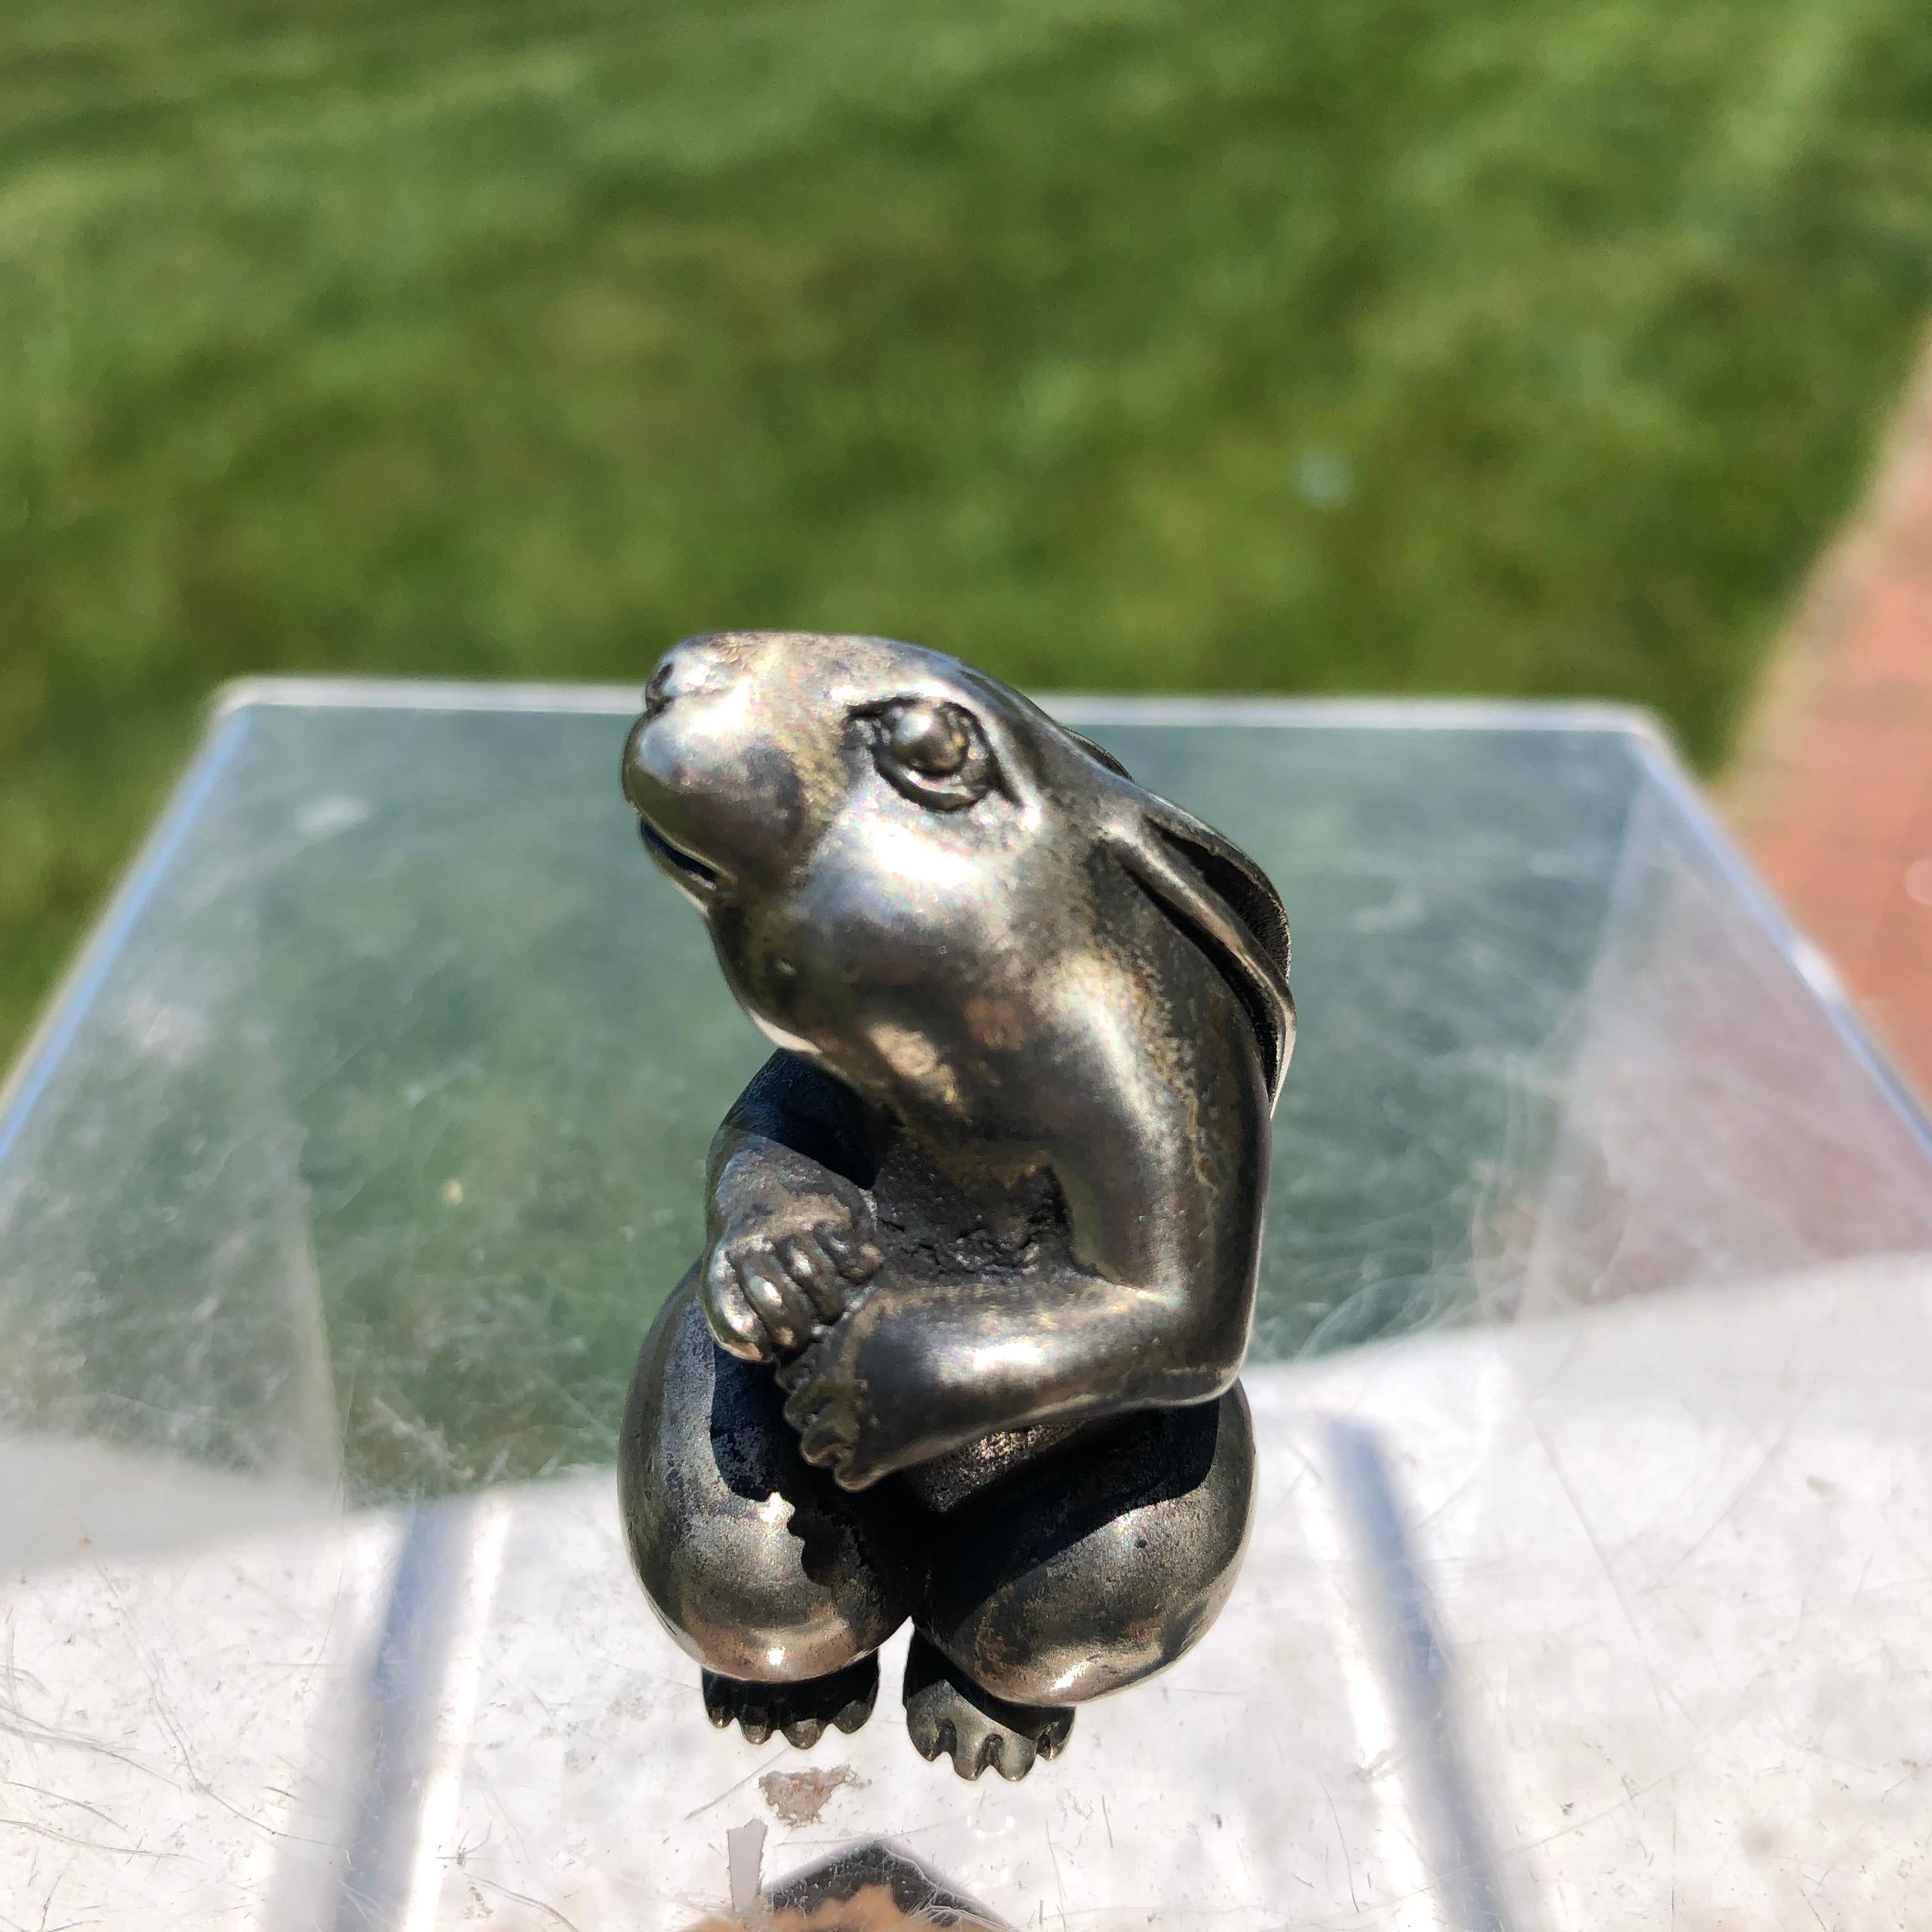 Fine collectors item, first we have seen

This is a very fine solid cast silver effigy of a rabbit usagi which has been embellished by this masterful artist with fine floral engraved body details. This was sourced from a large Japanese collection